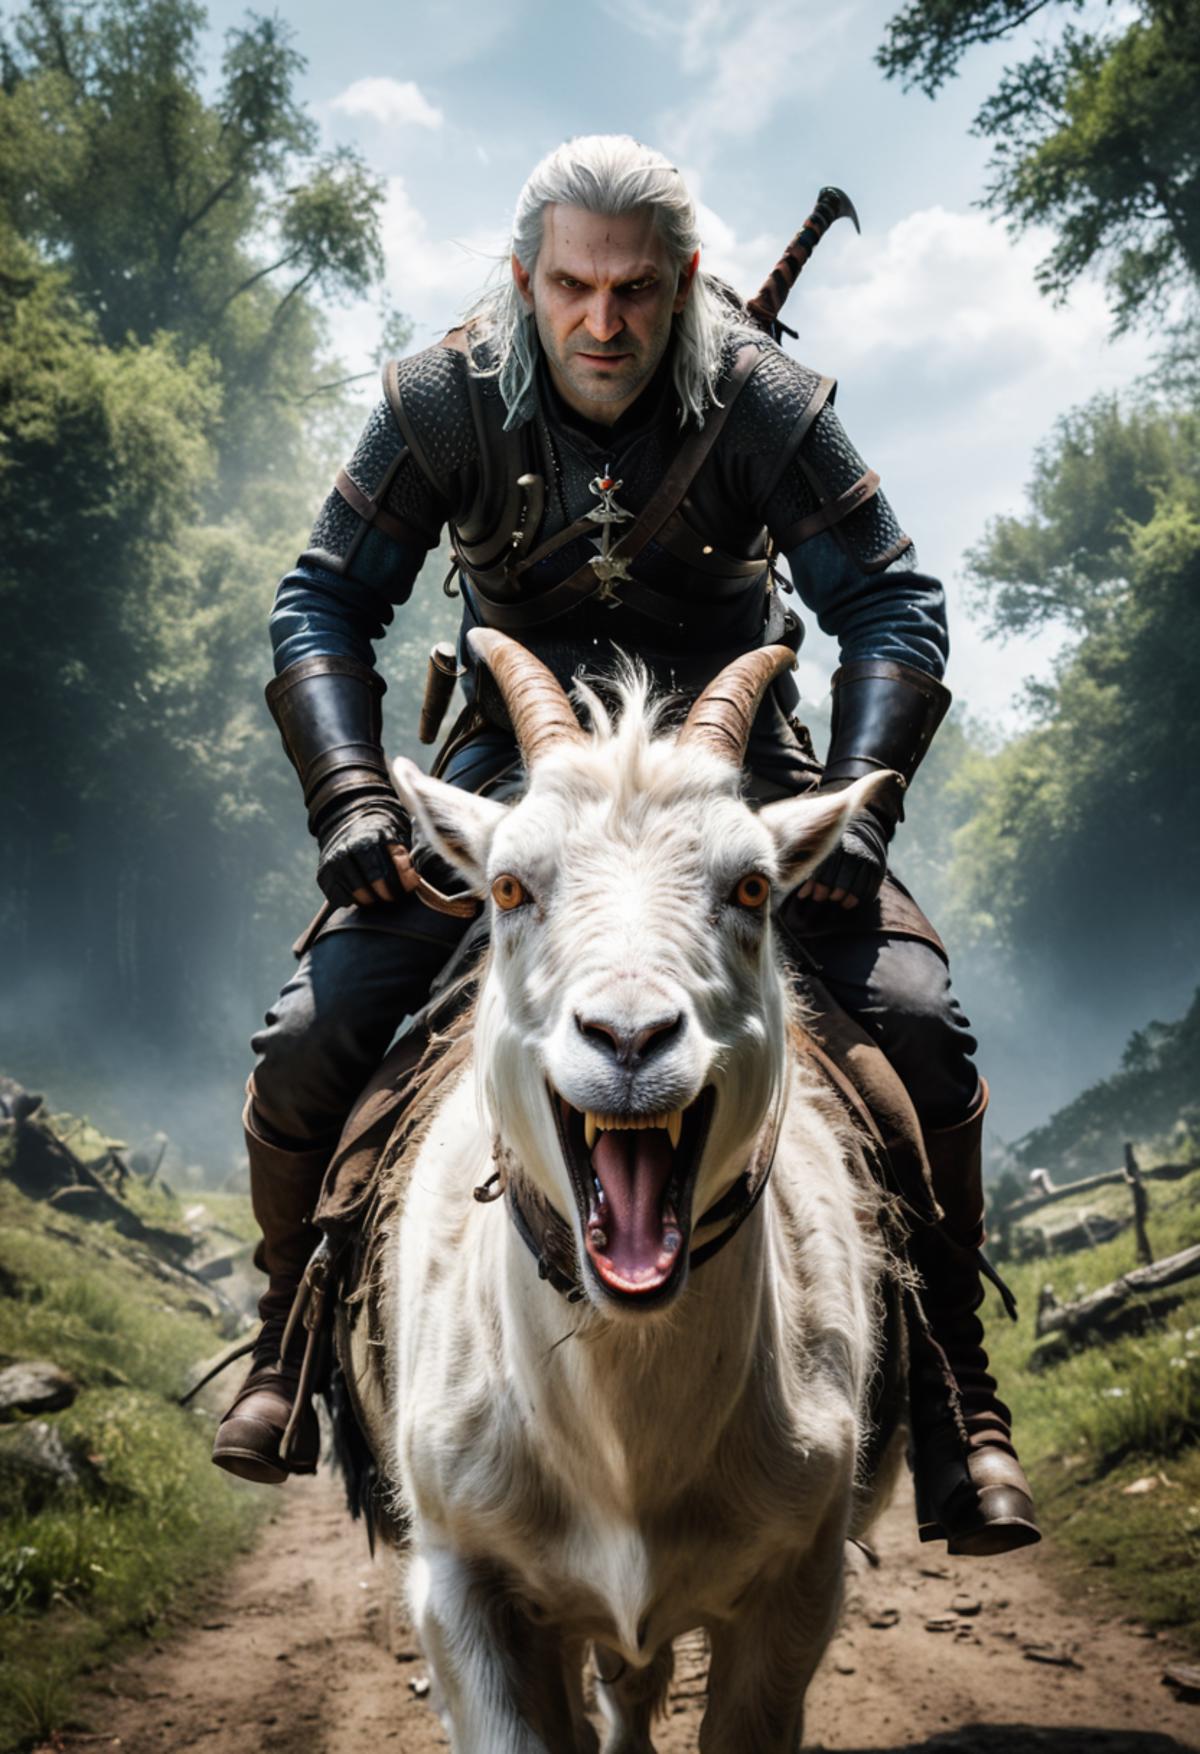 A man riding a goat with a sword in his hand.